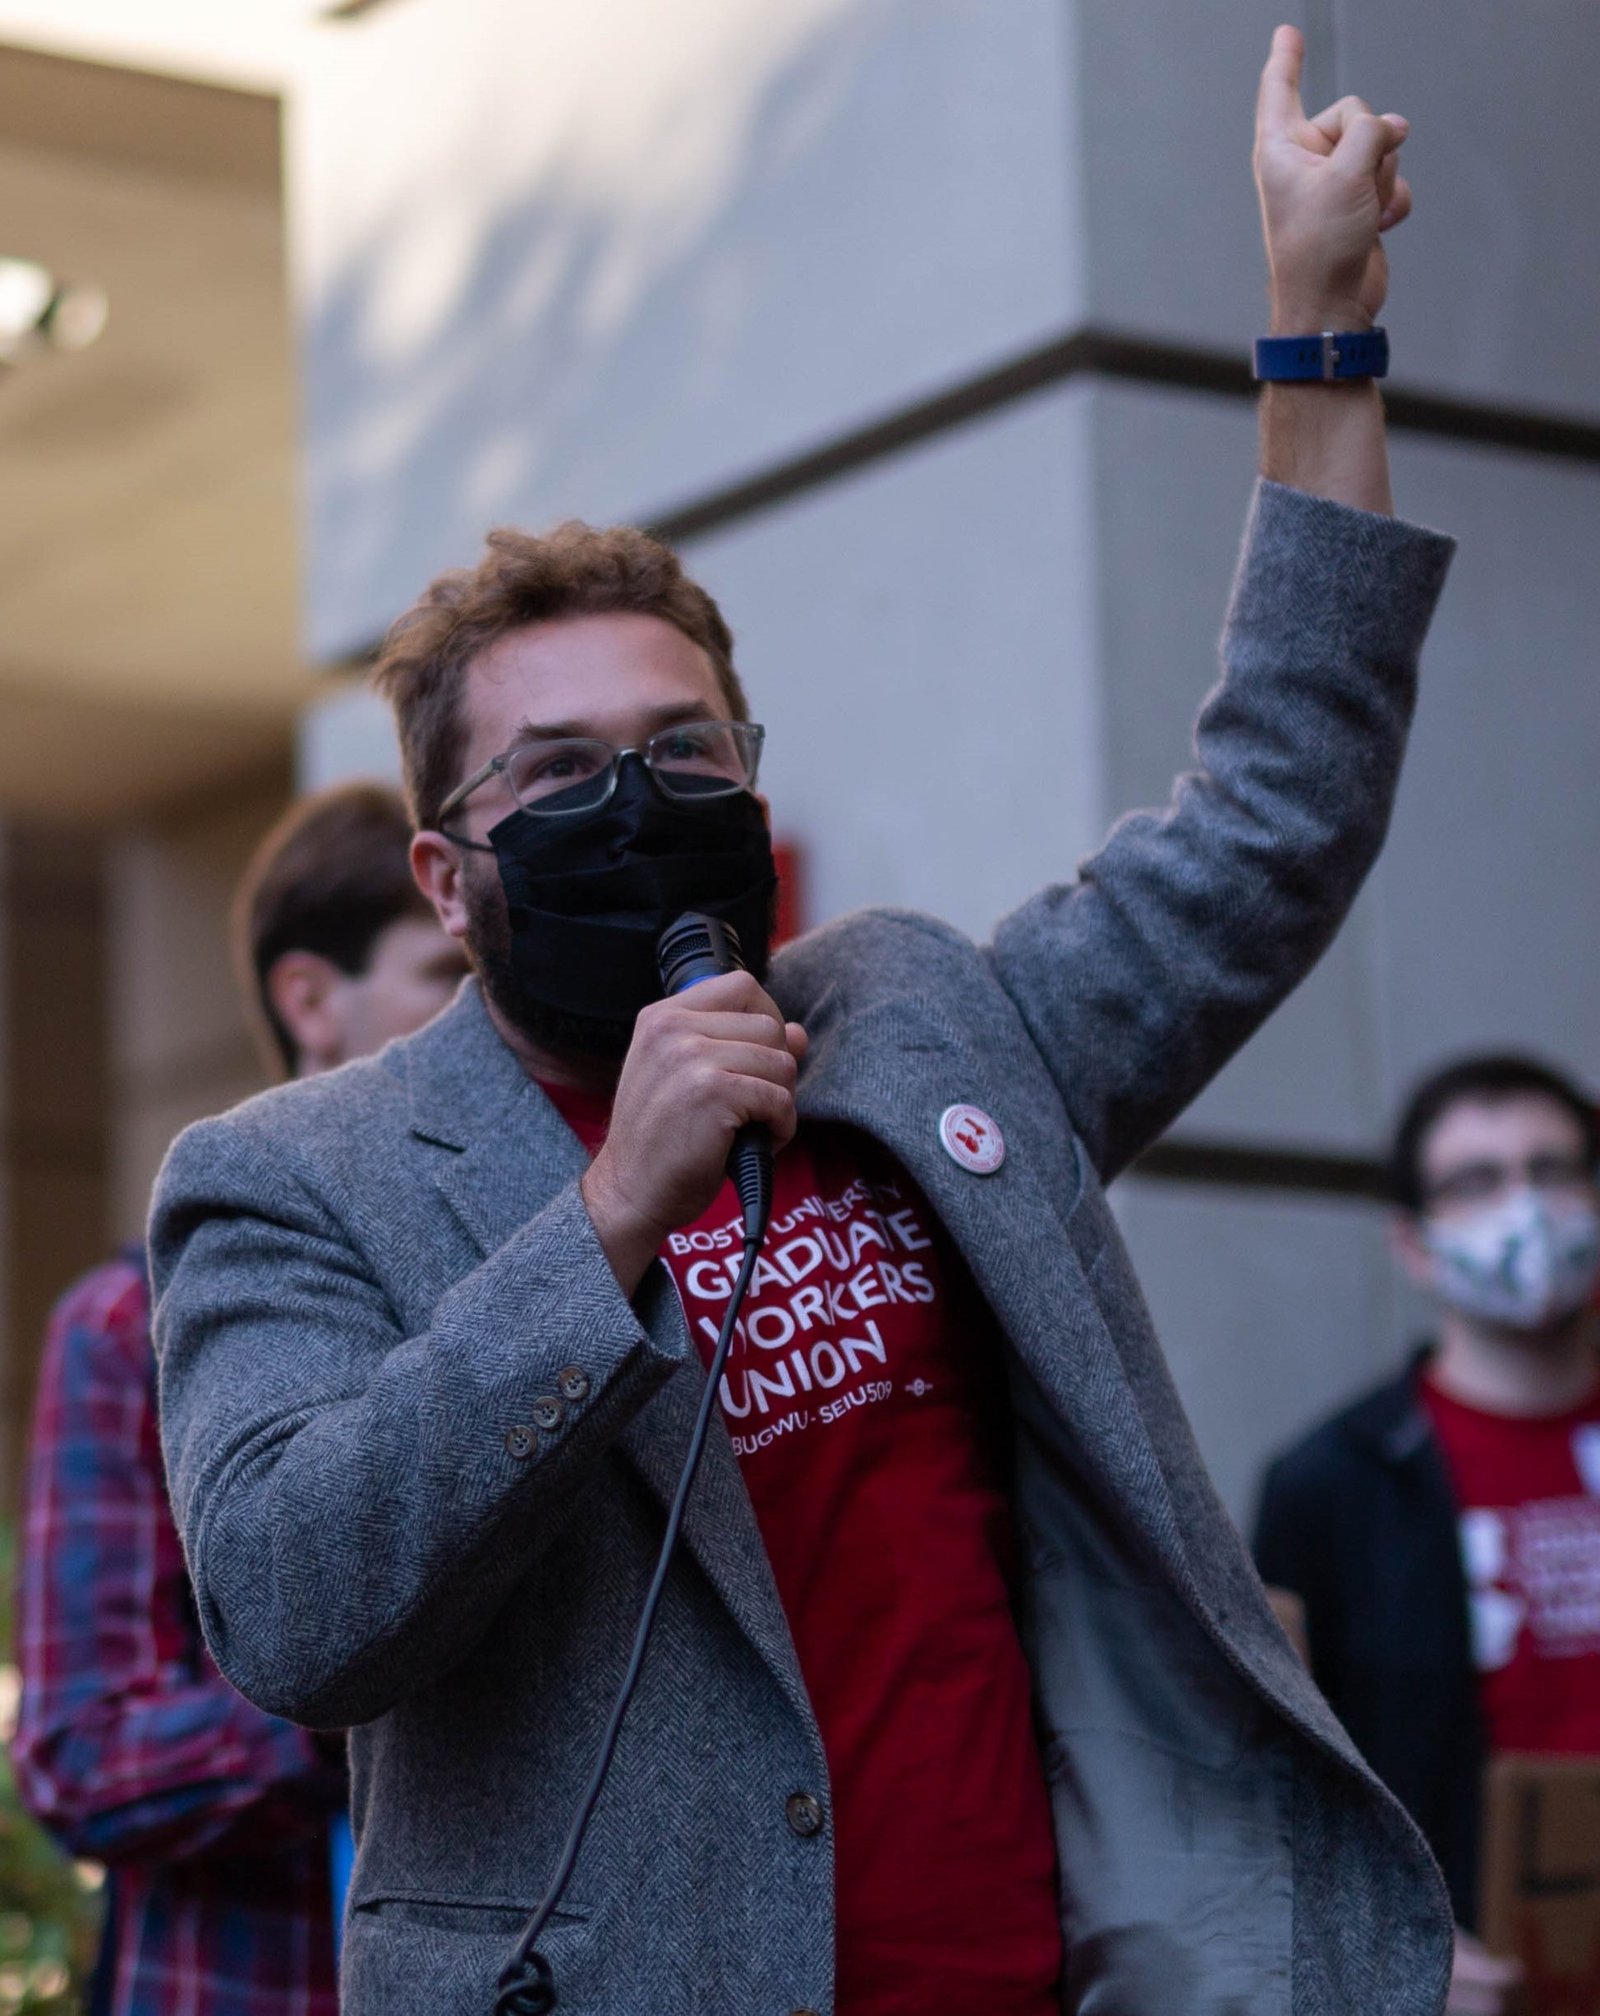 A BU grad worker holding a microphone at a rally